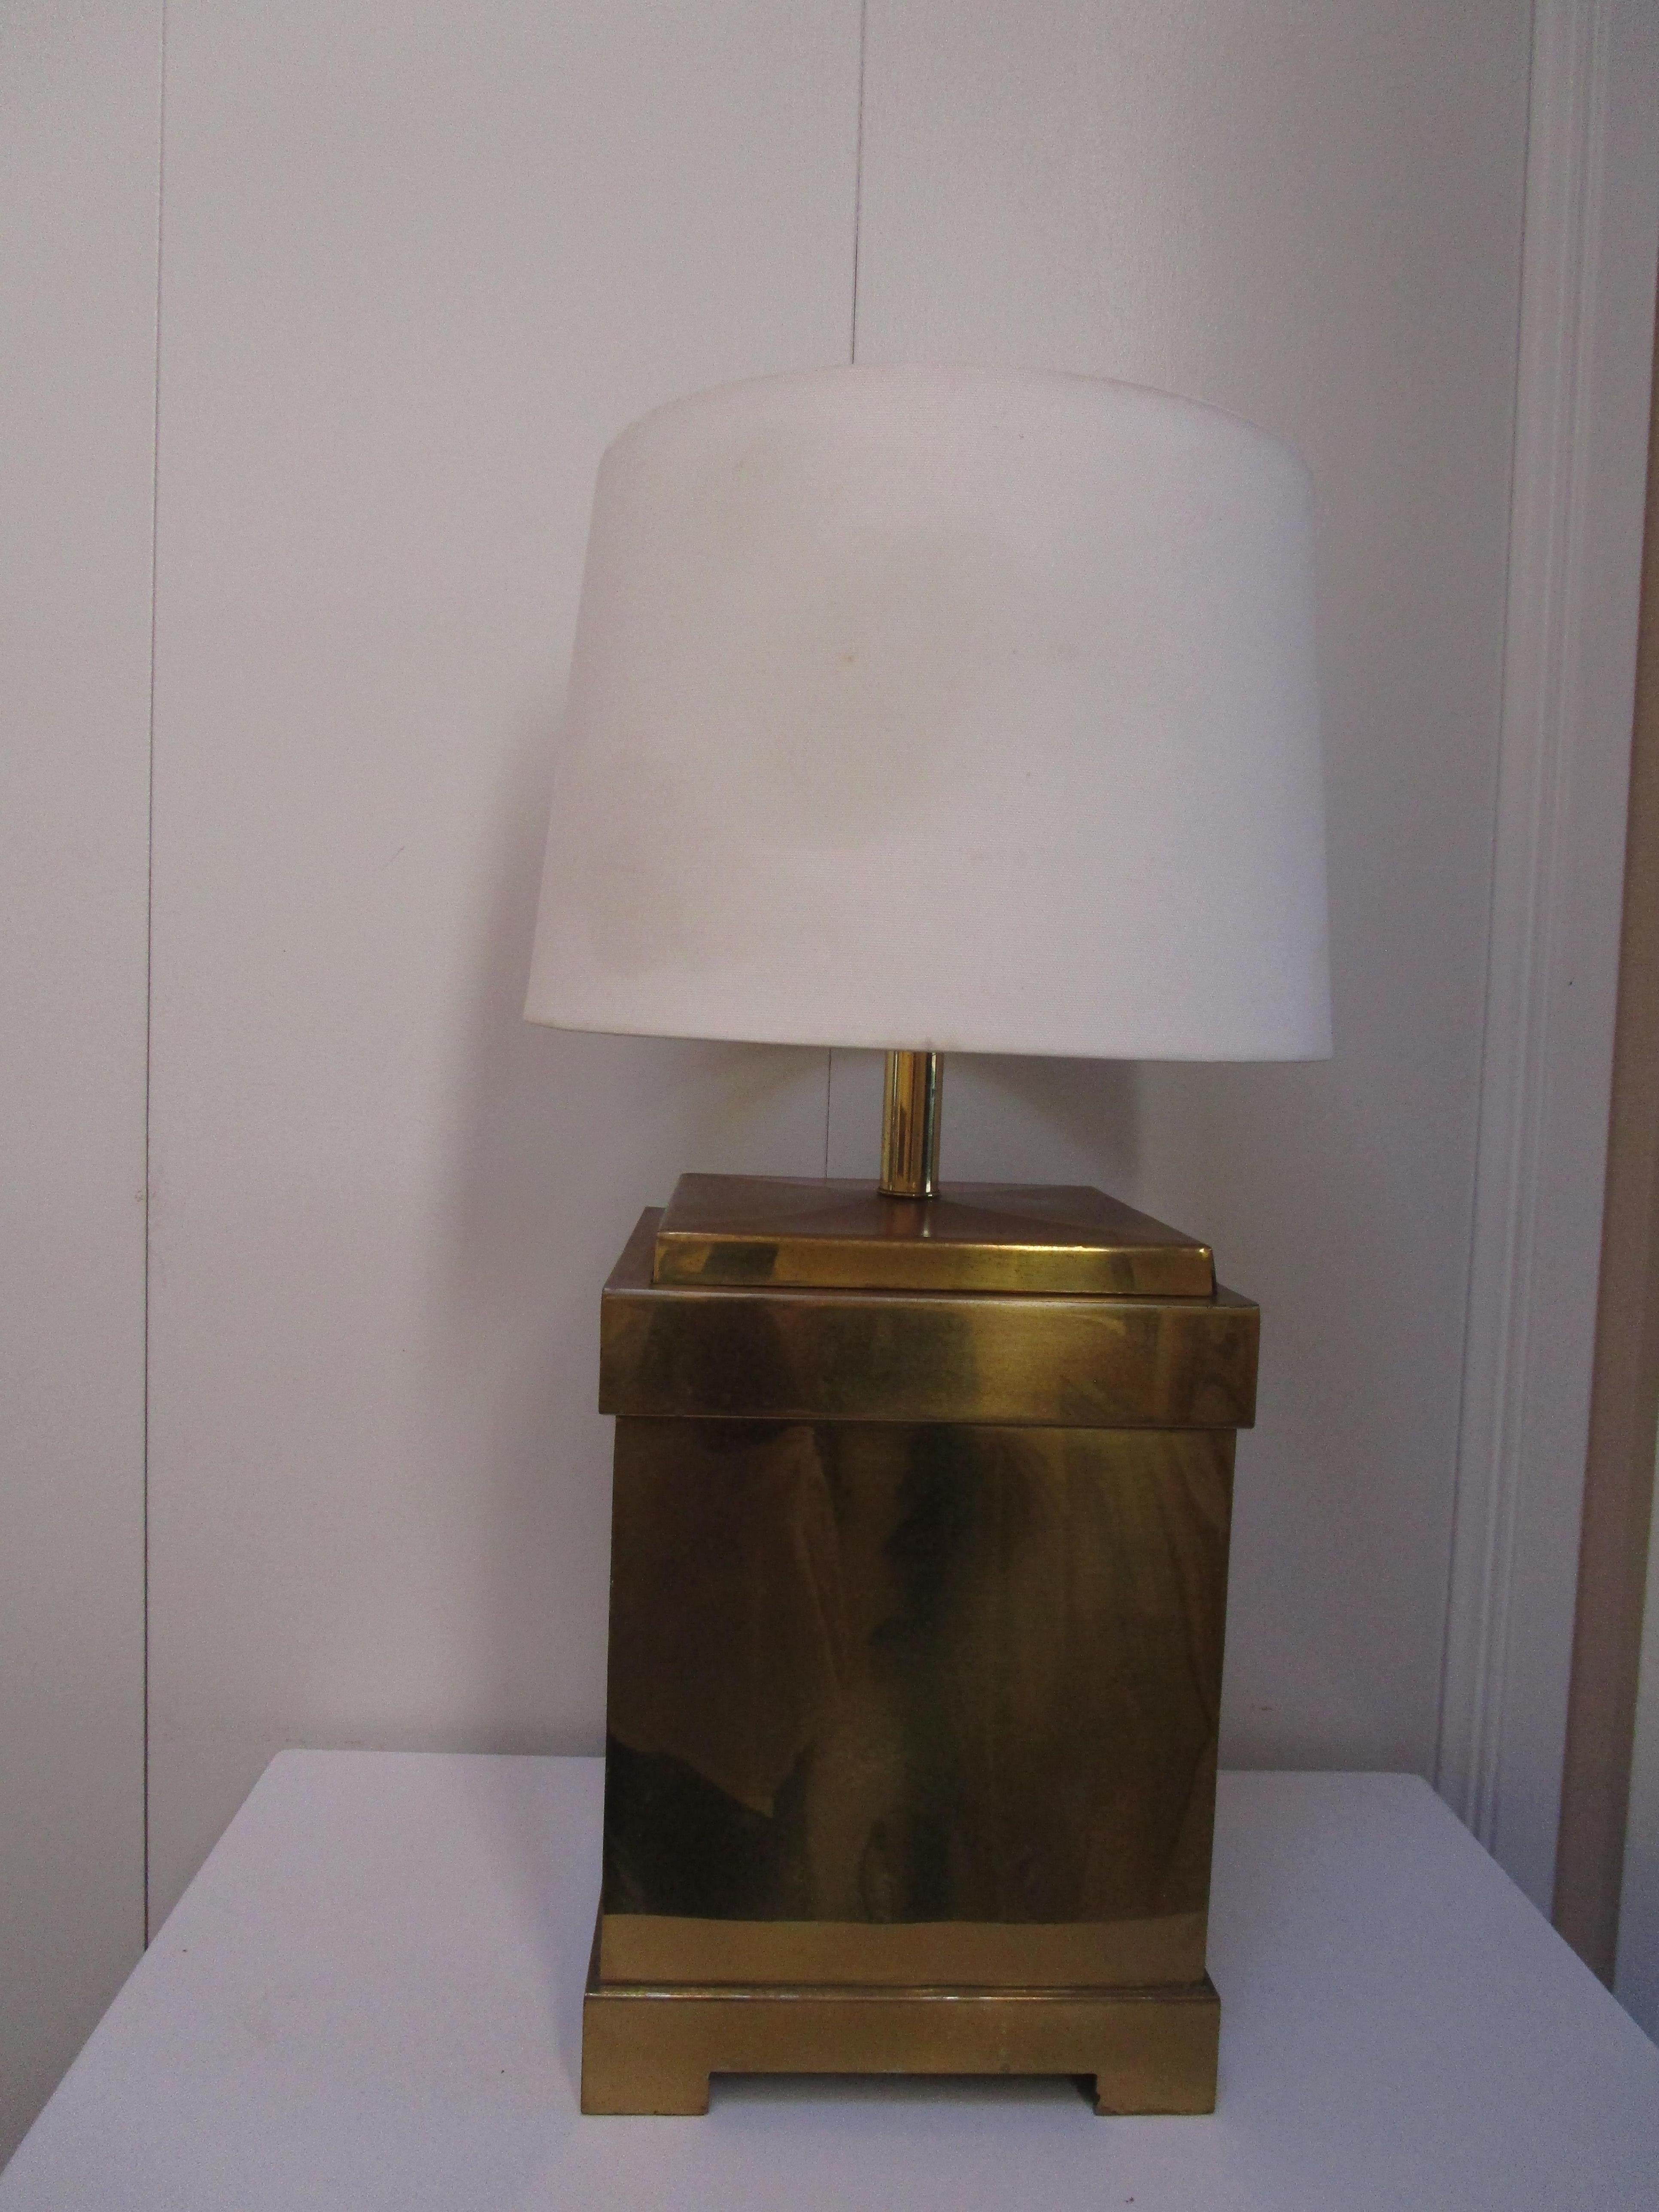 This is an incredible lamp with a geometric or architectural feel. It has the Remington label on it, a lamp maker from the Hollywood Regency period. But it also has a label that says it was produced in Hong Kong. The lamp is of the period and shows